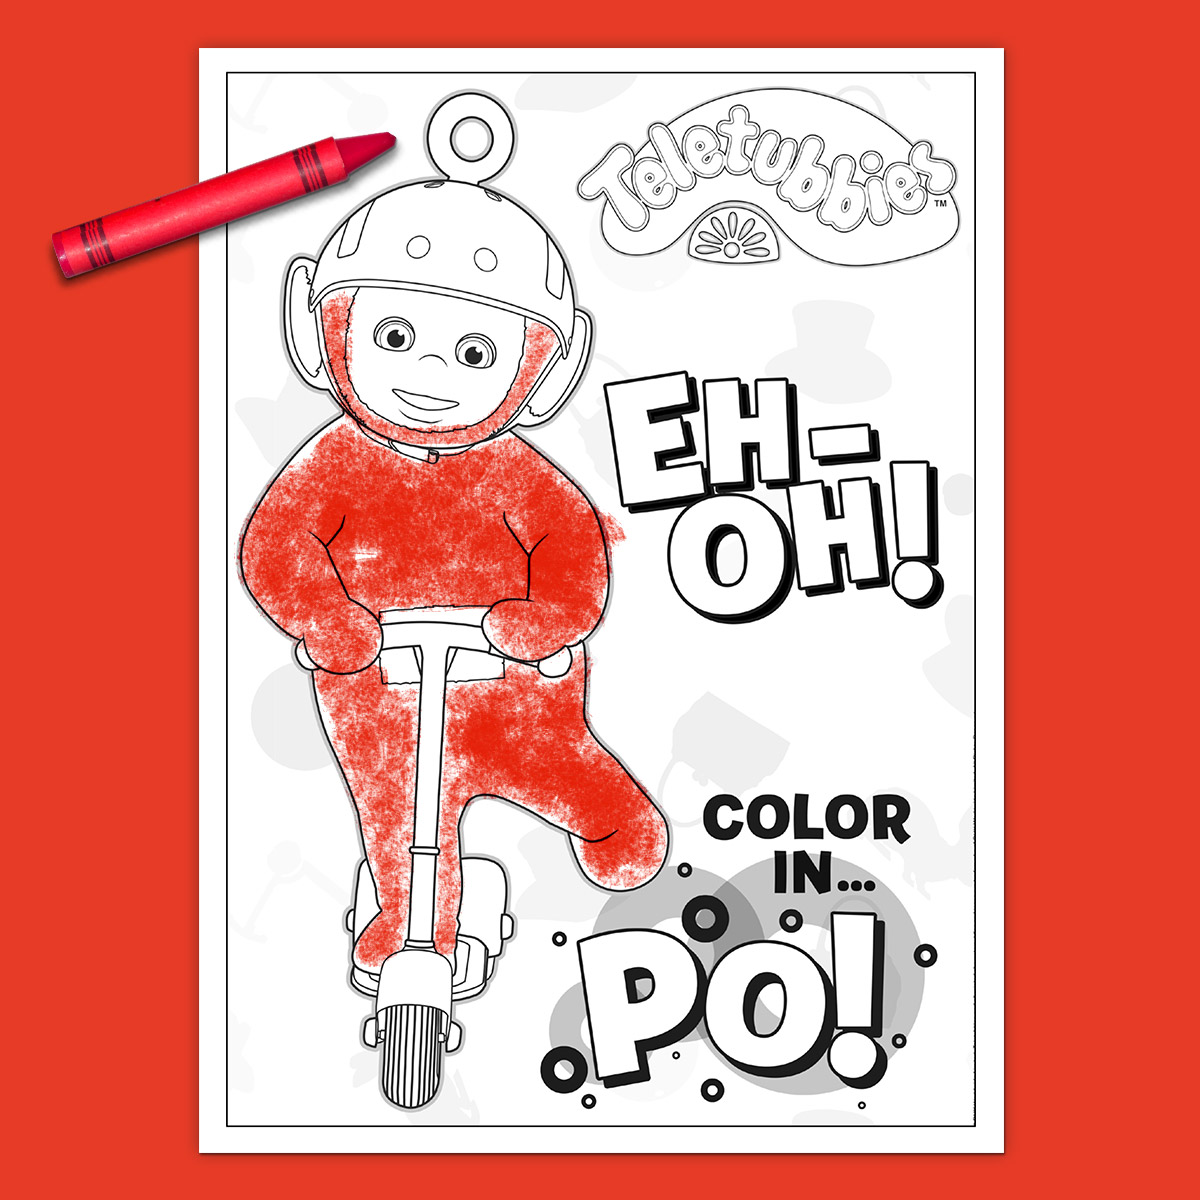 Teletubbies Coloring Page: Po